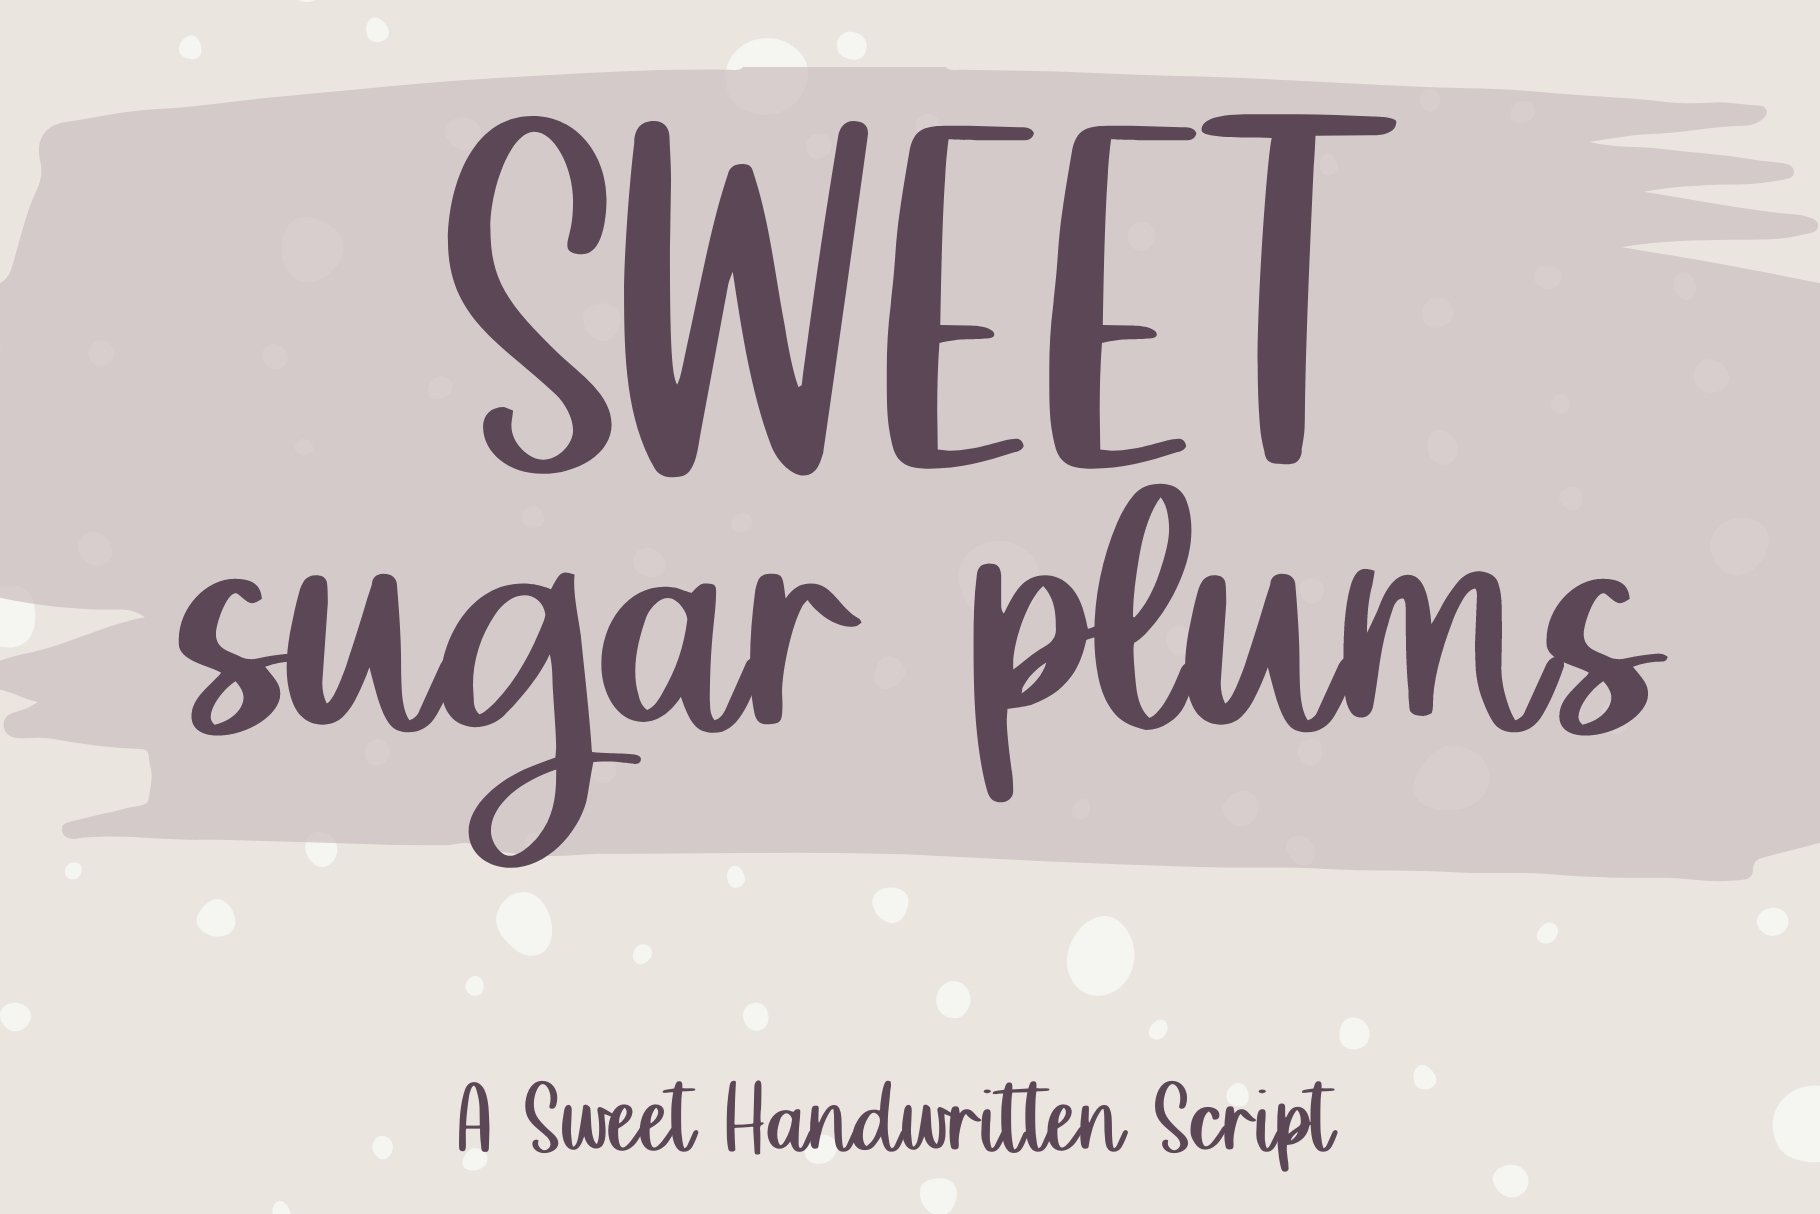 Sweet Sugar Plums - A Sweet Script cover image.